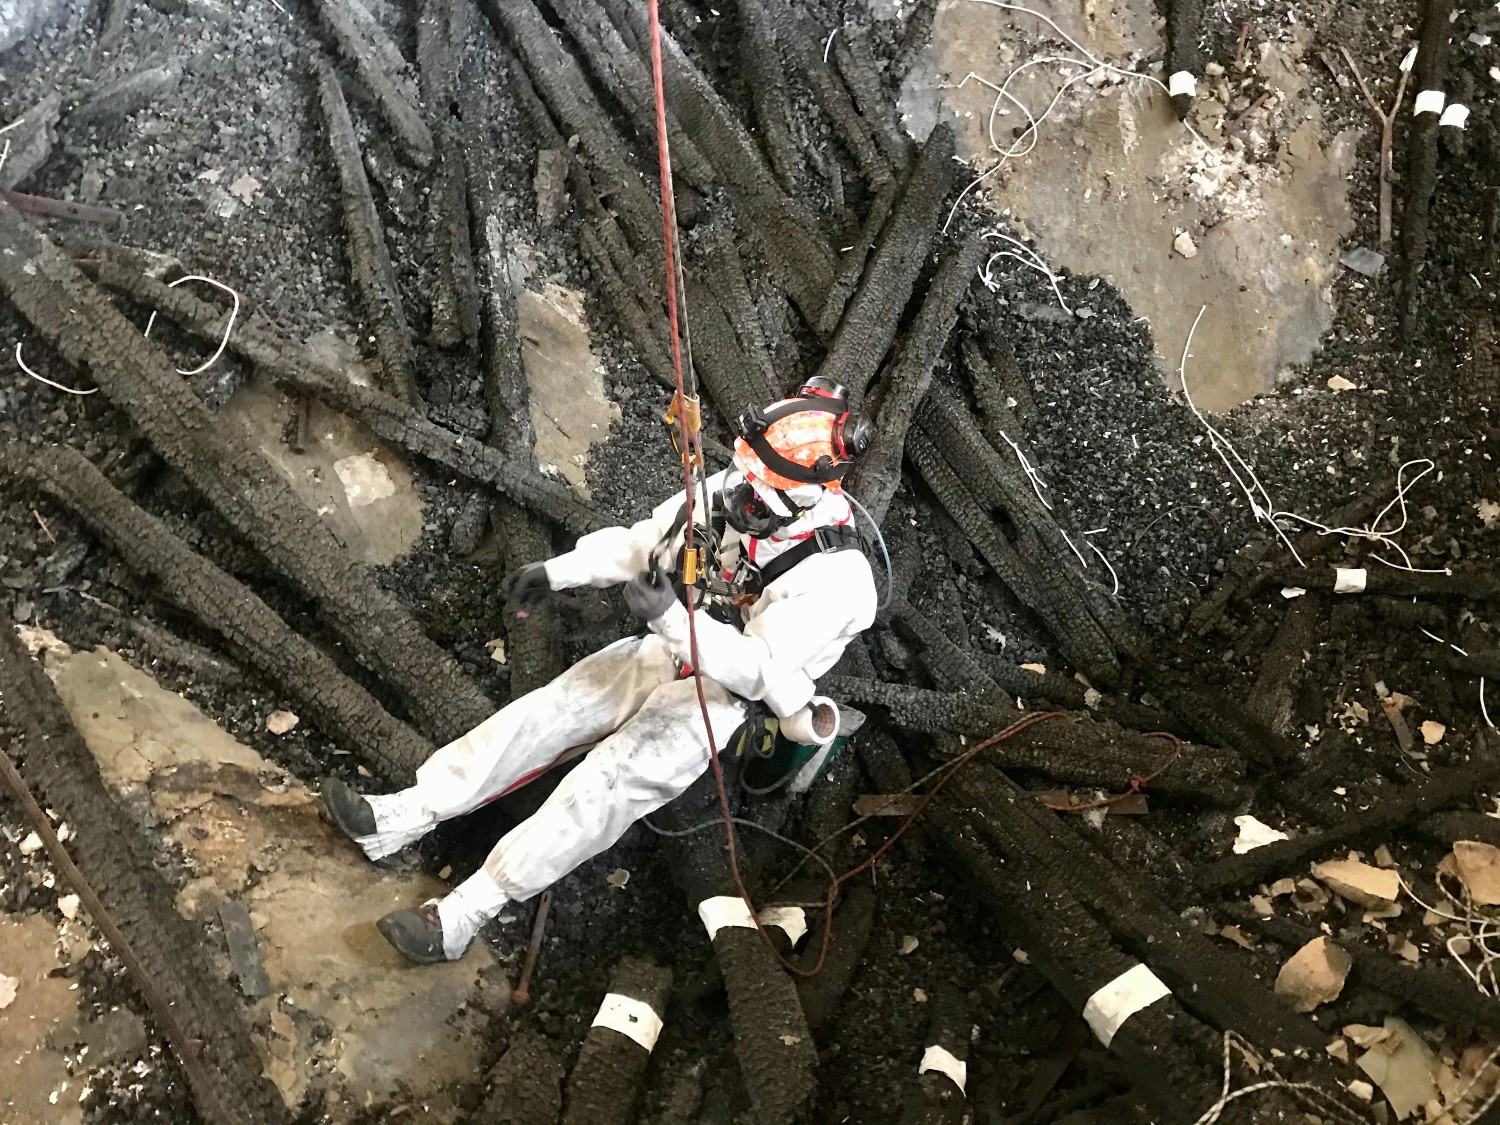 Rope access worker and damaged timbers